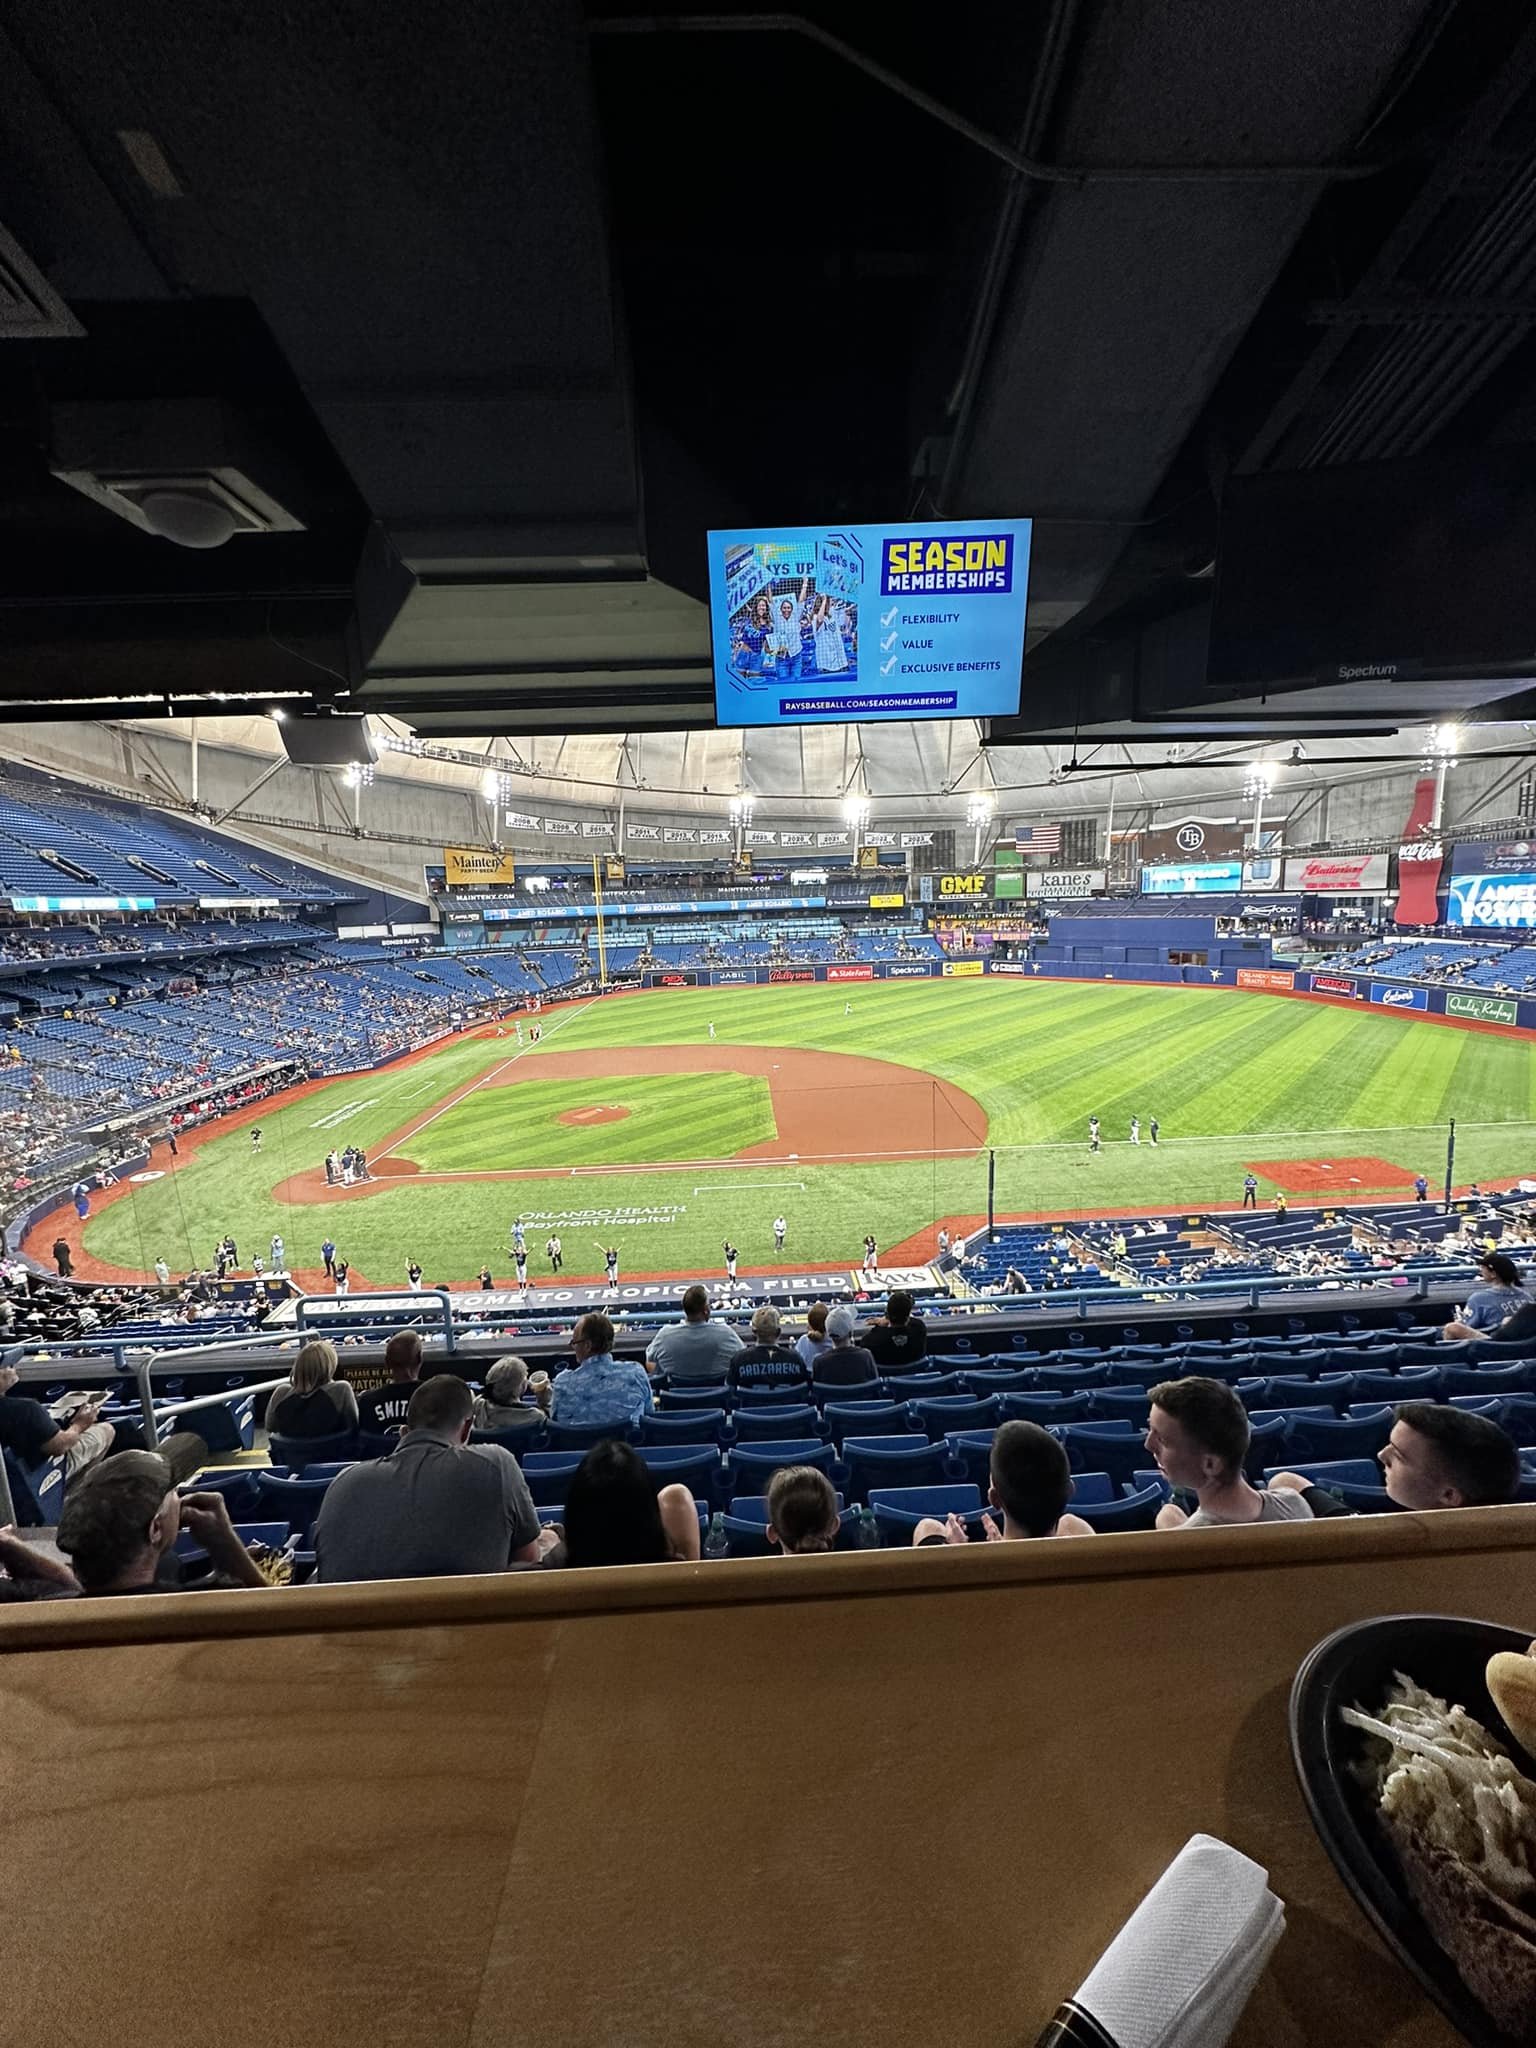 At the rays game, a really nice day for some baseball. The stadium didn&rsquo;t really fill in I&rsquo;m up in box chowing down.